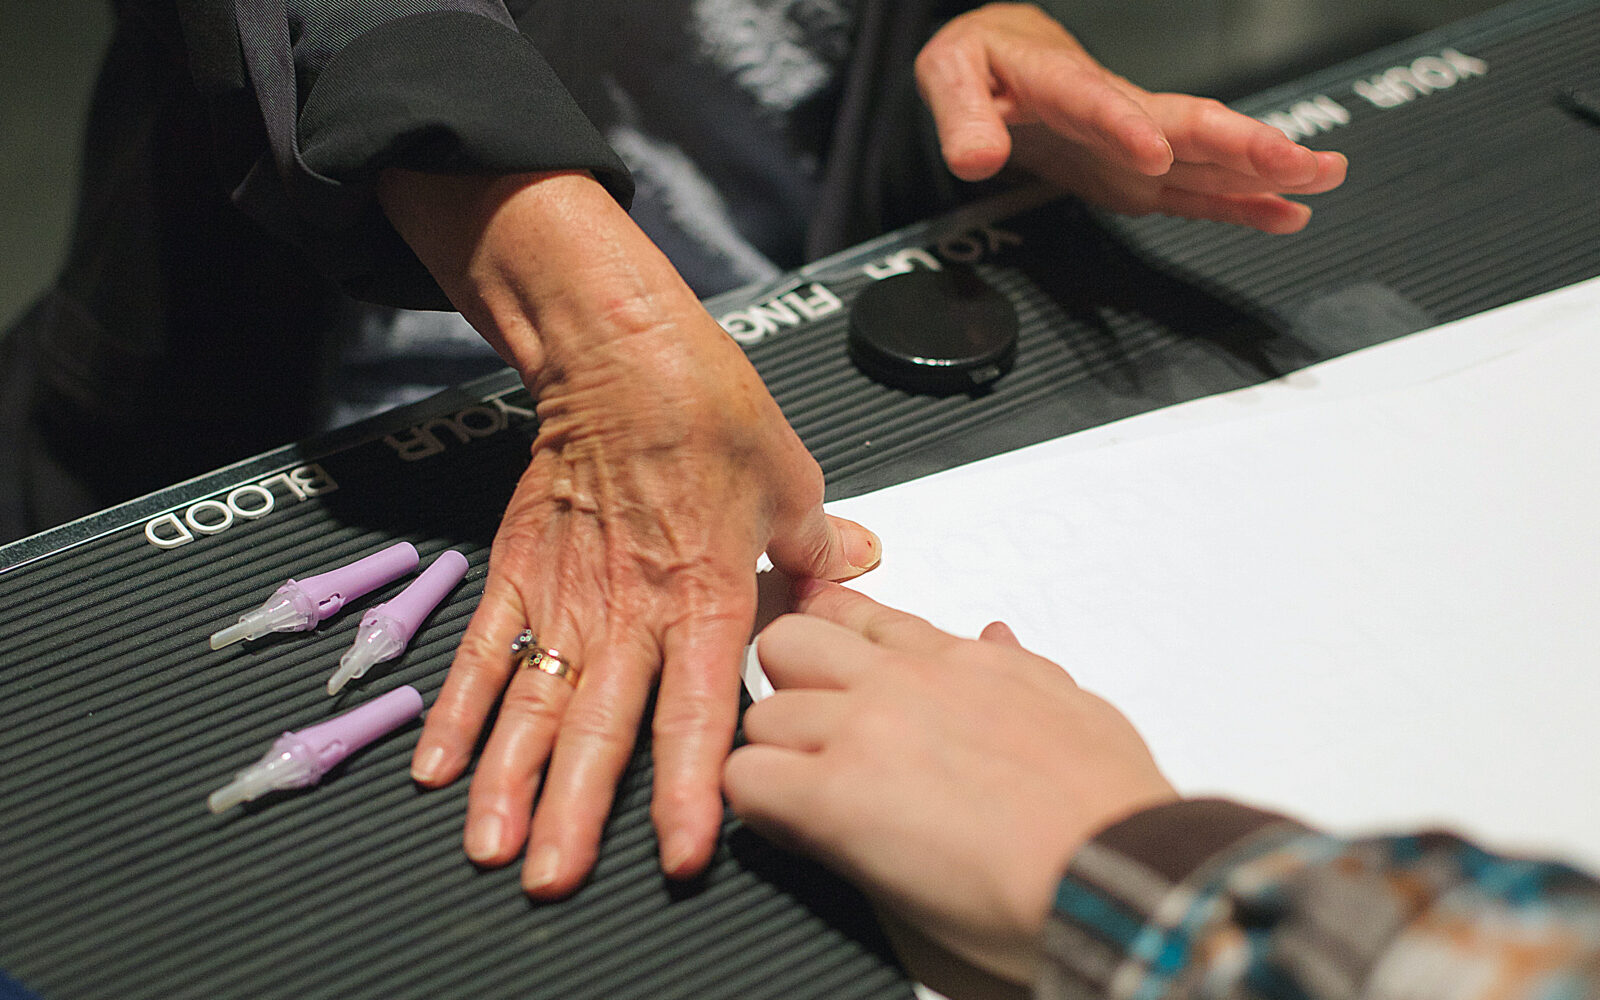 Two people touch hands across a table. One is older, one is younger. To the side of their touching hands are 3 finger prickers.